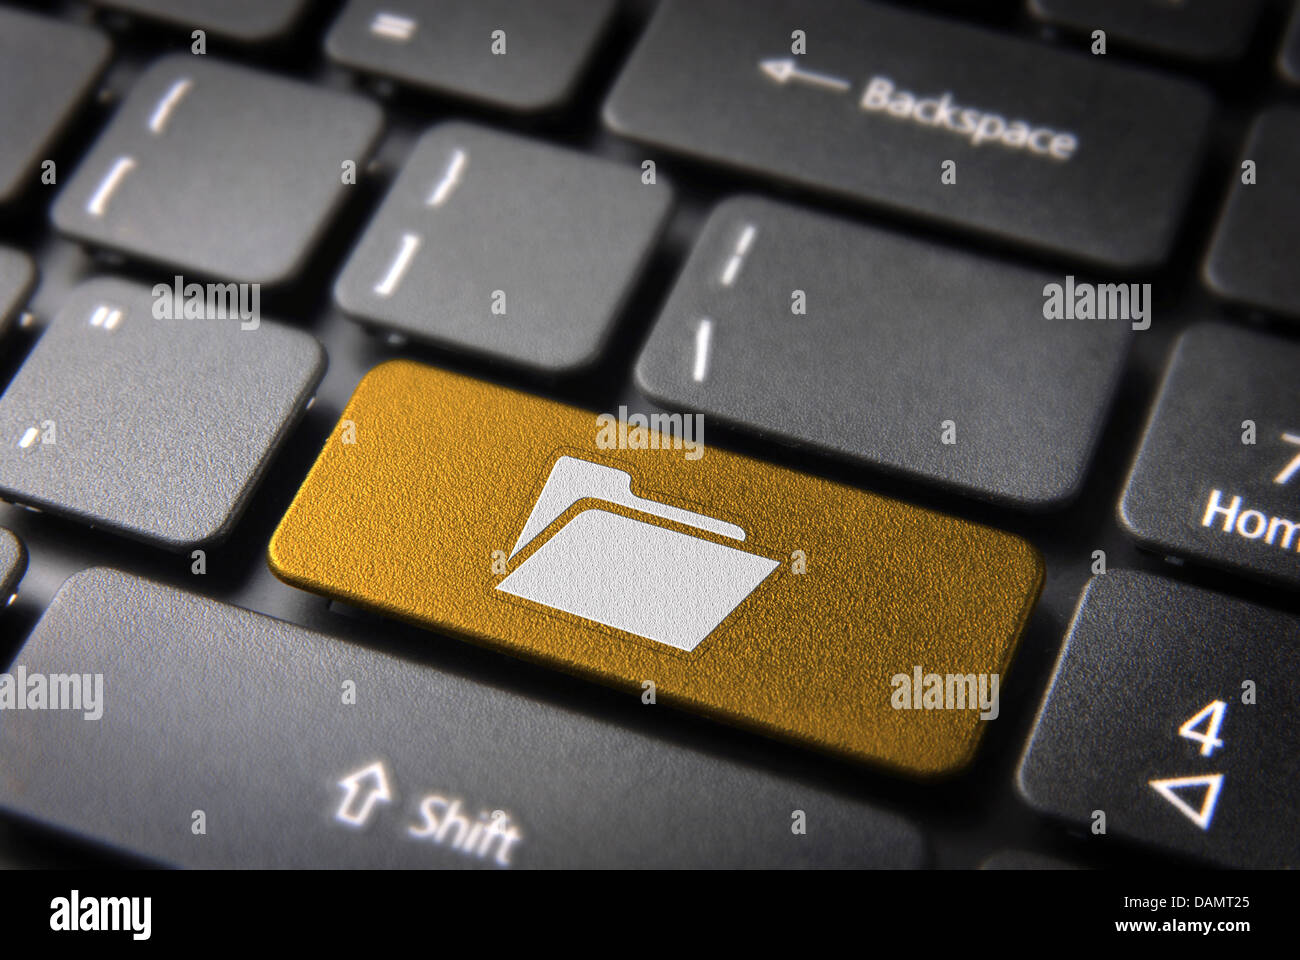 Software key with folder icon on laptop keyboard. Included clipping path, so you can easily edit it. Stock Photo